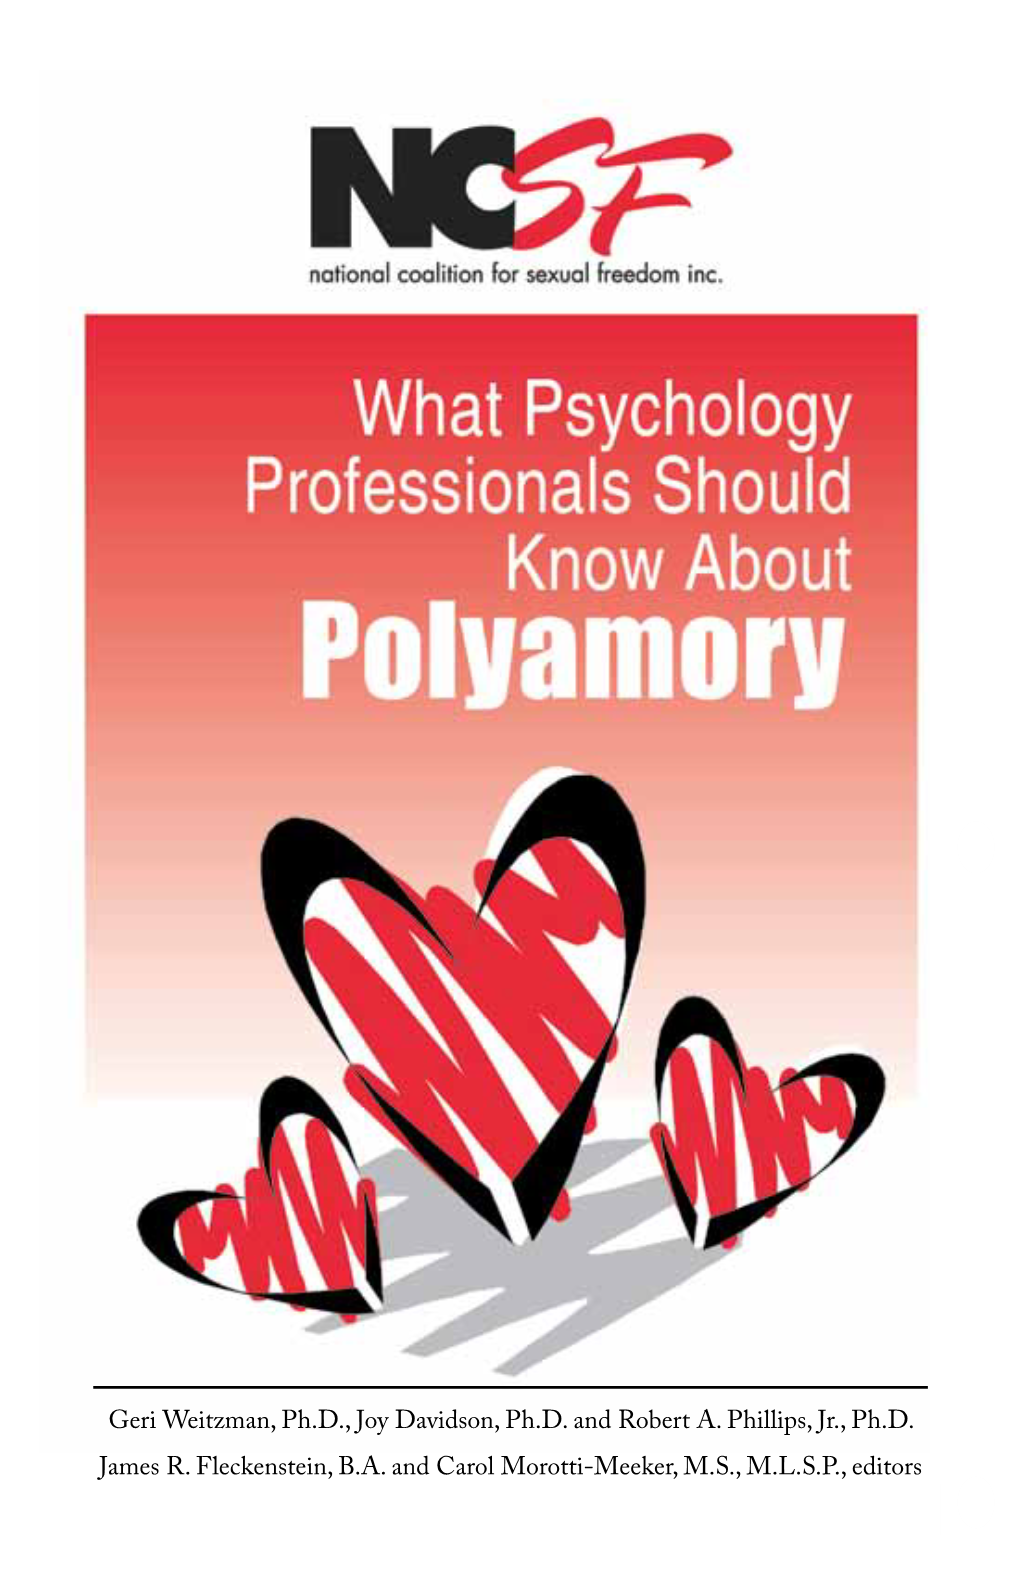 What Psychology Professionals Should Know About Polyamory